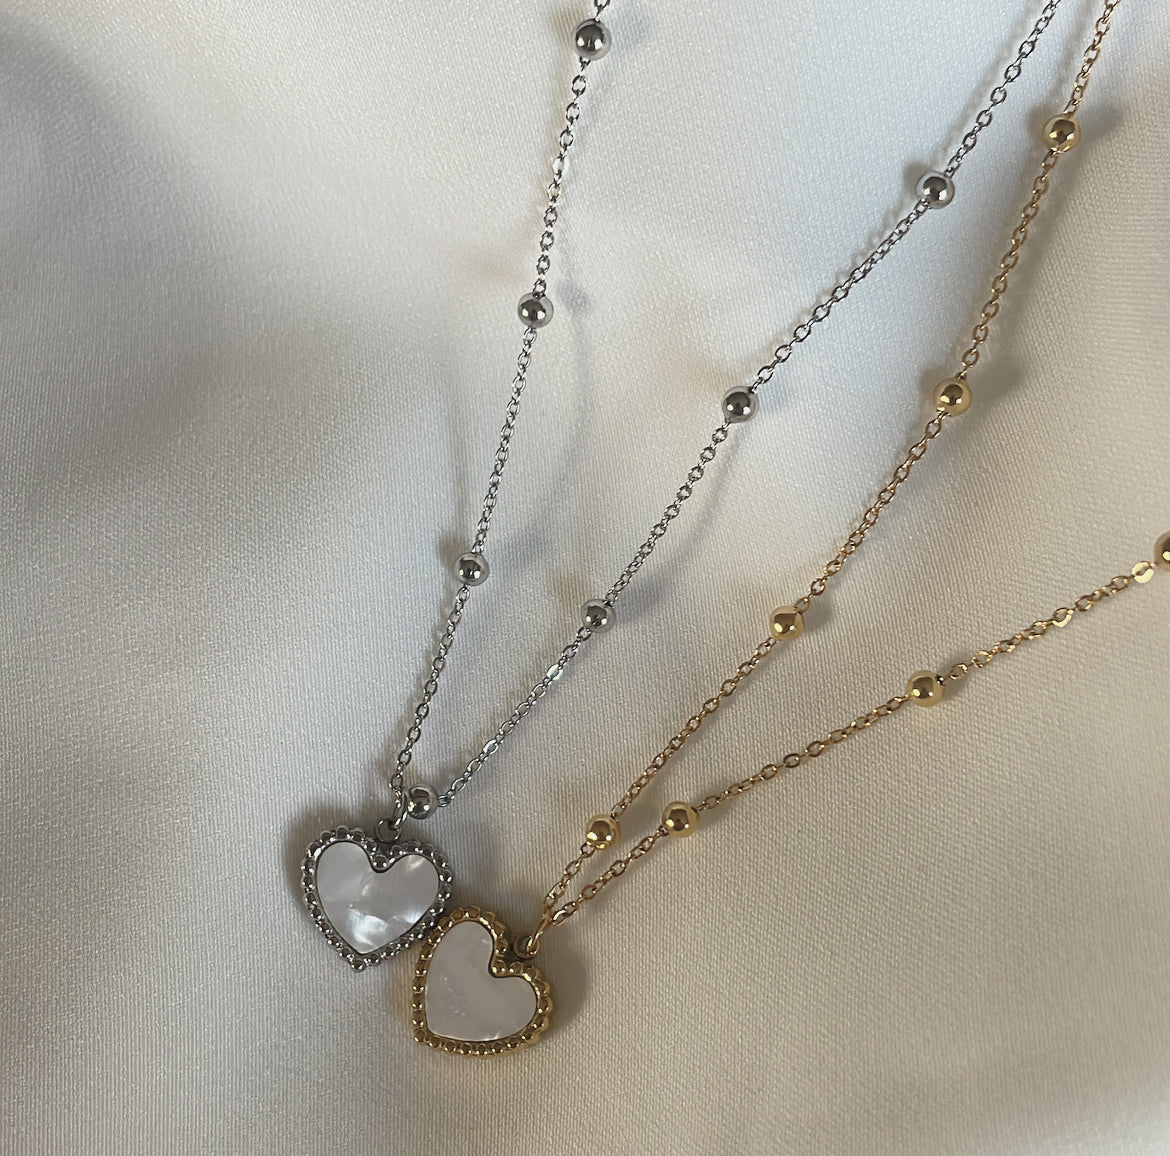 ‘GLIMMER HEART’ necklace